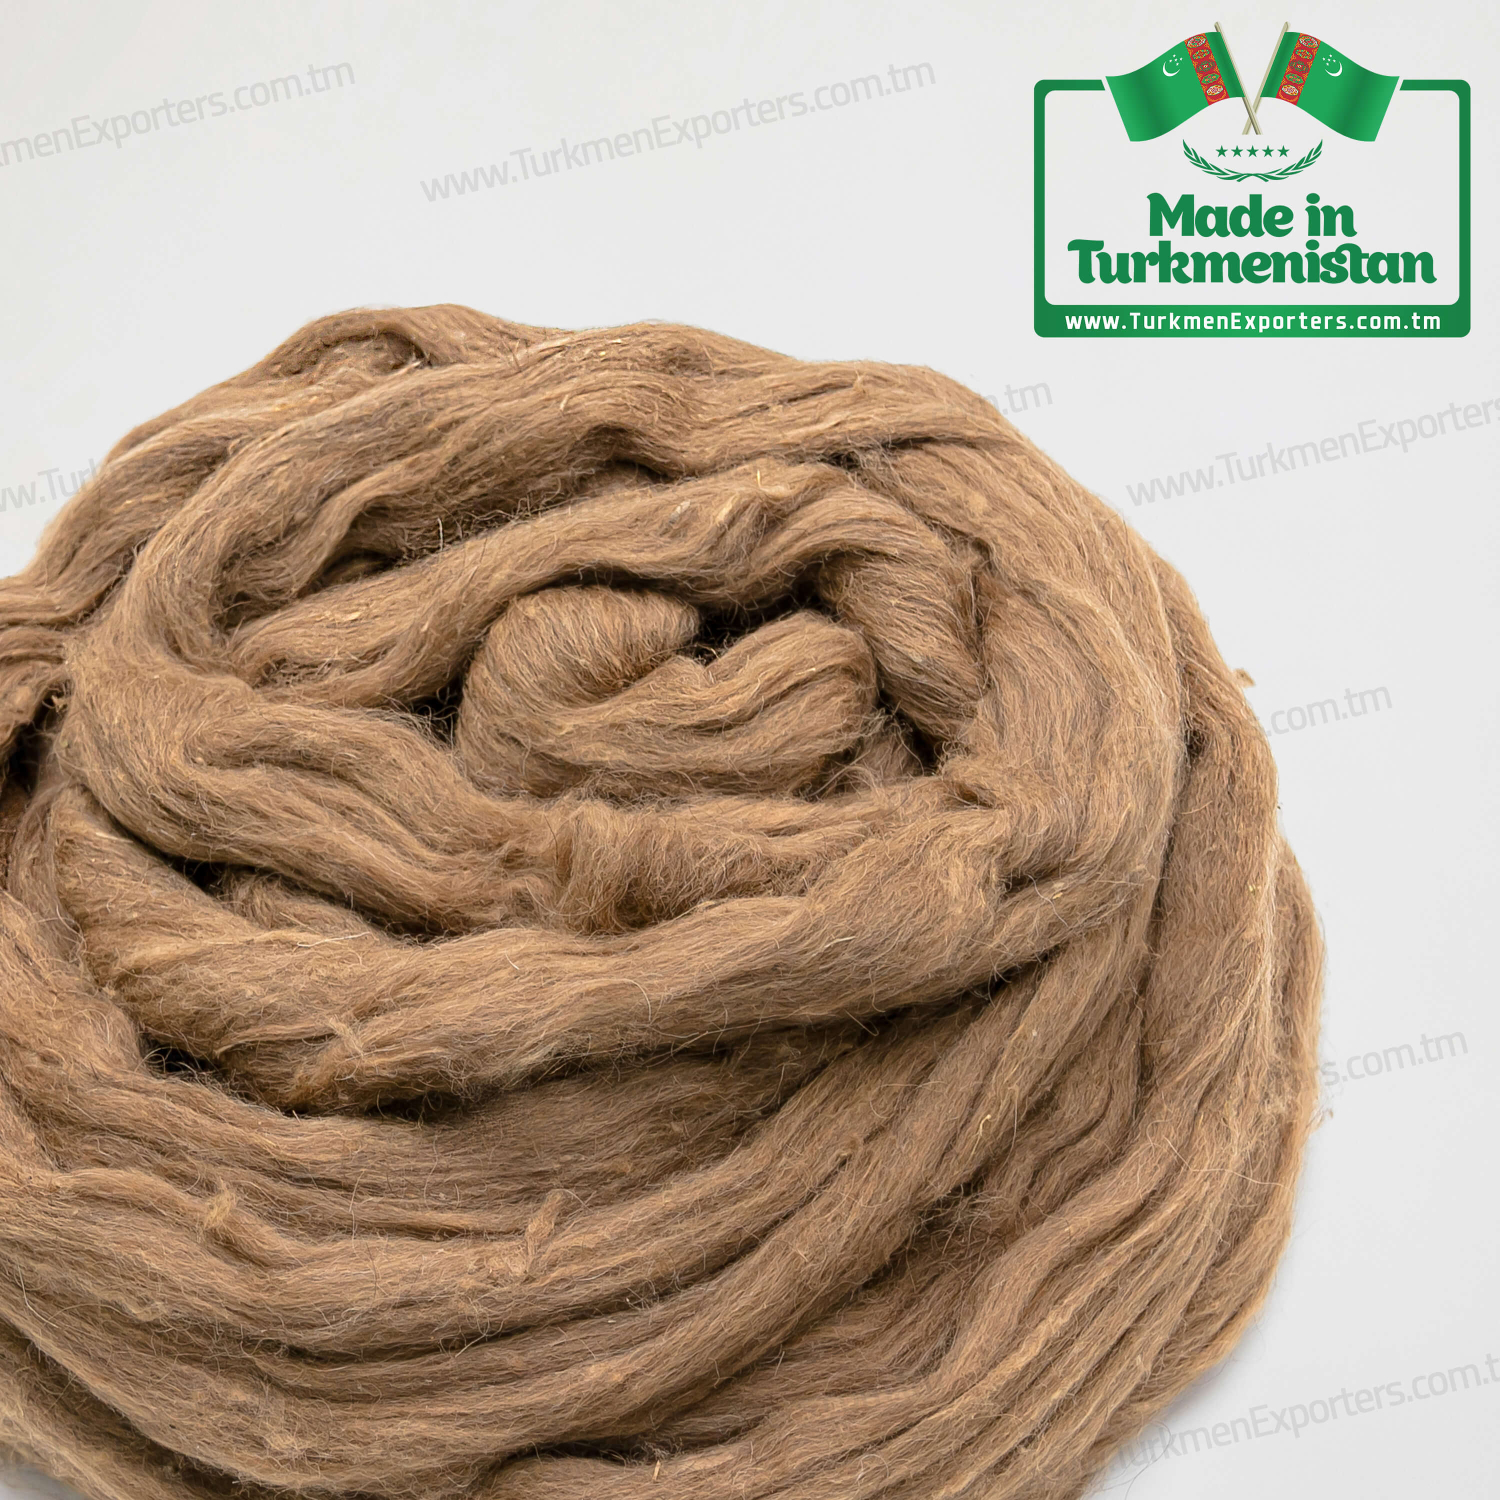 Camel wool Made in Turkmenistan | Turkmen Export, Import & Trading Services Company